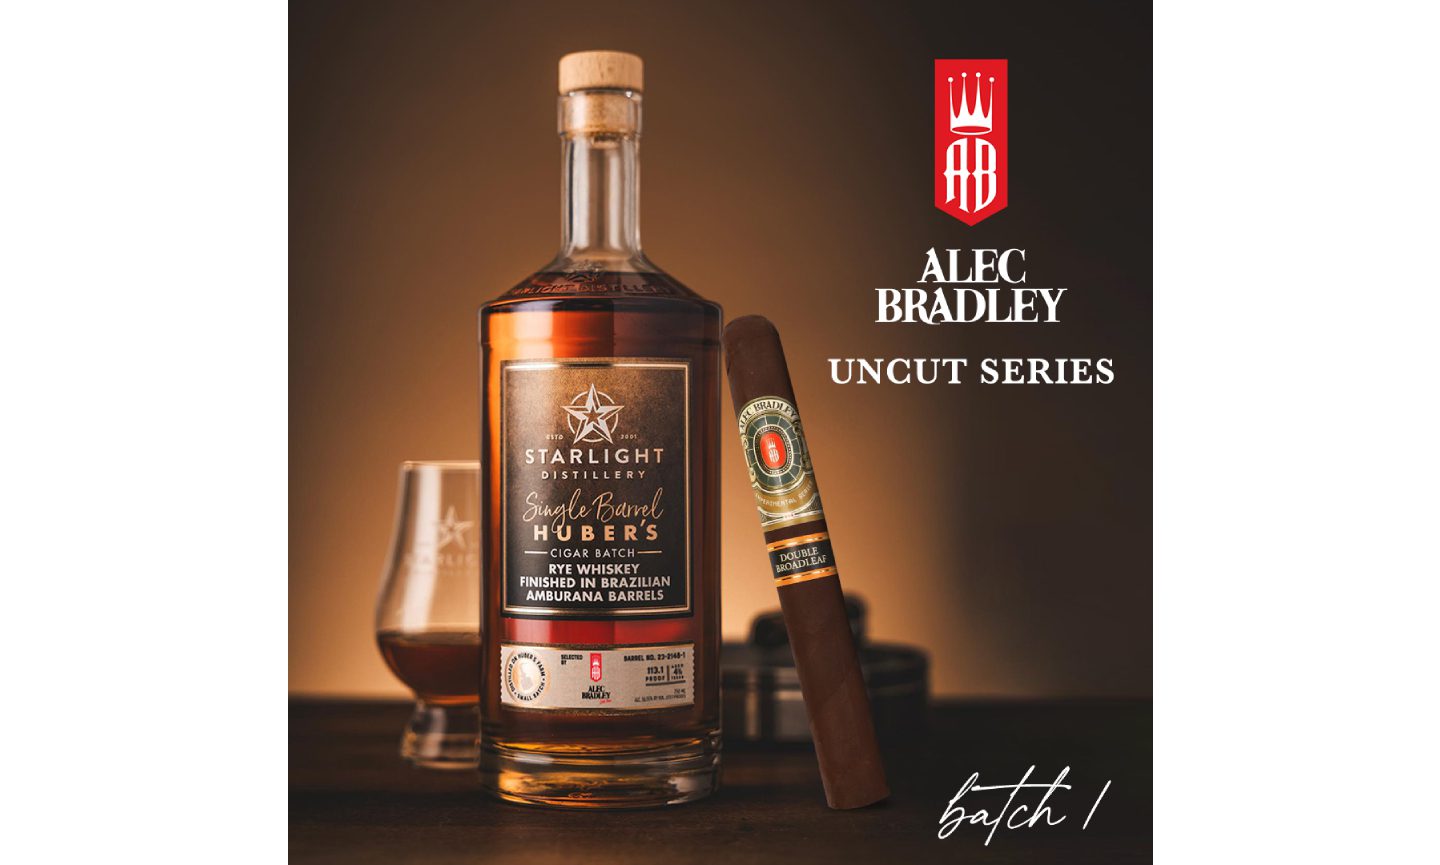 the-uncut-series-launches-with-alec-bradley-and-starlight-rye-whiskey-pairing